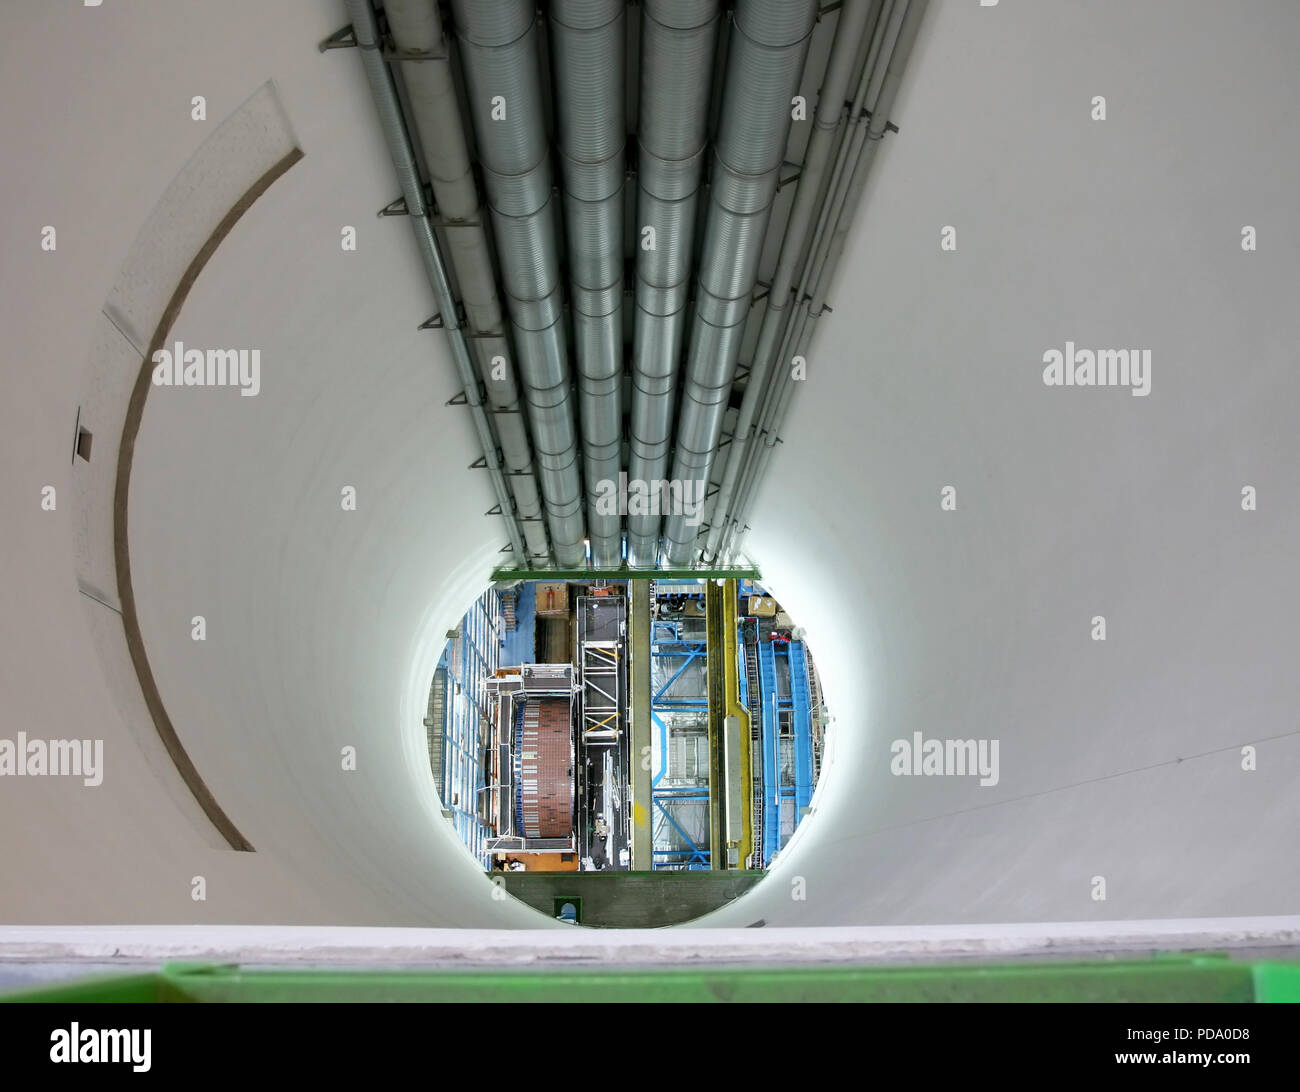 Albums 94+ Images where is the world’s most powerful particle accelerator located Excellent